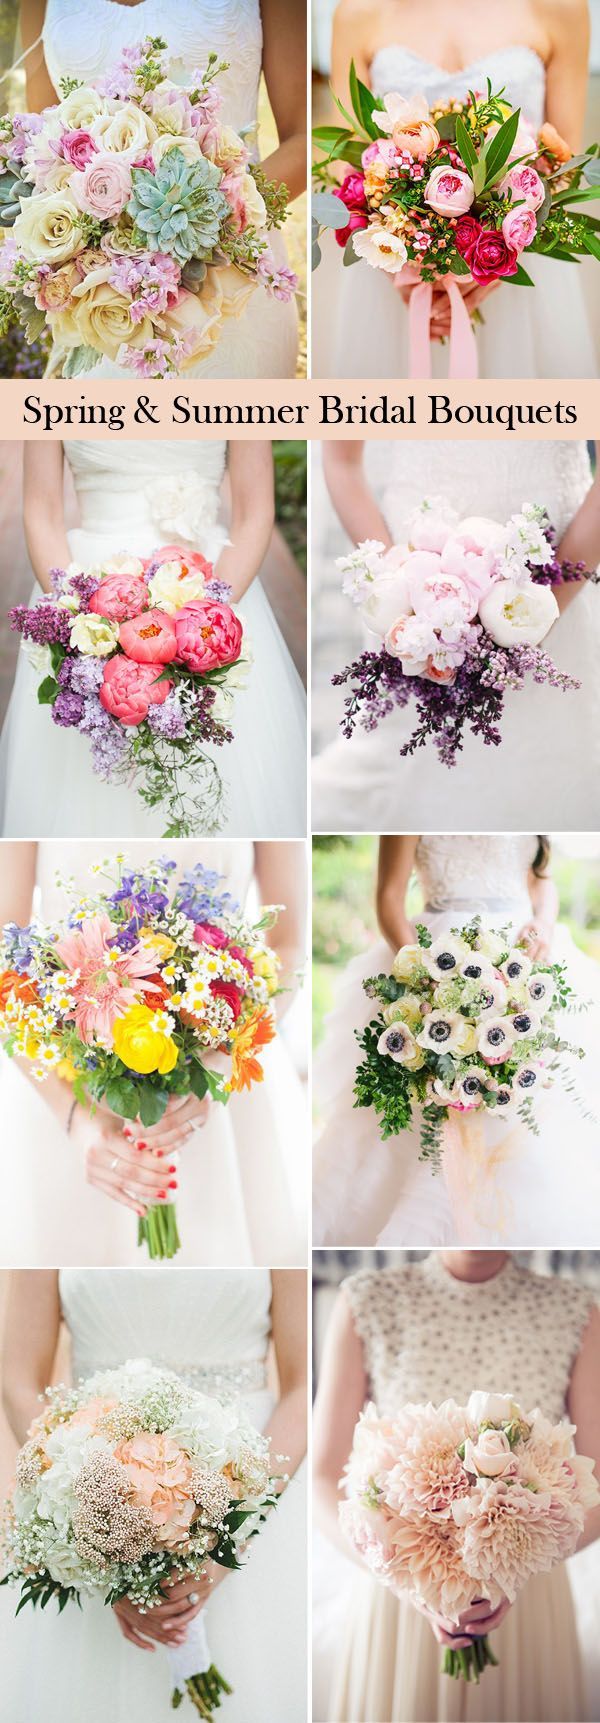 25 swoon worthy wedding bouquets ideas for spring & summer brides